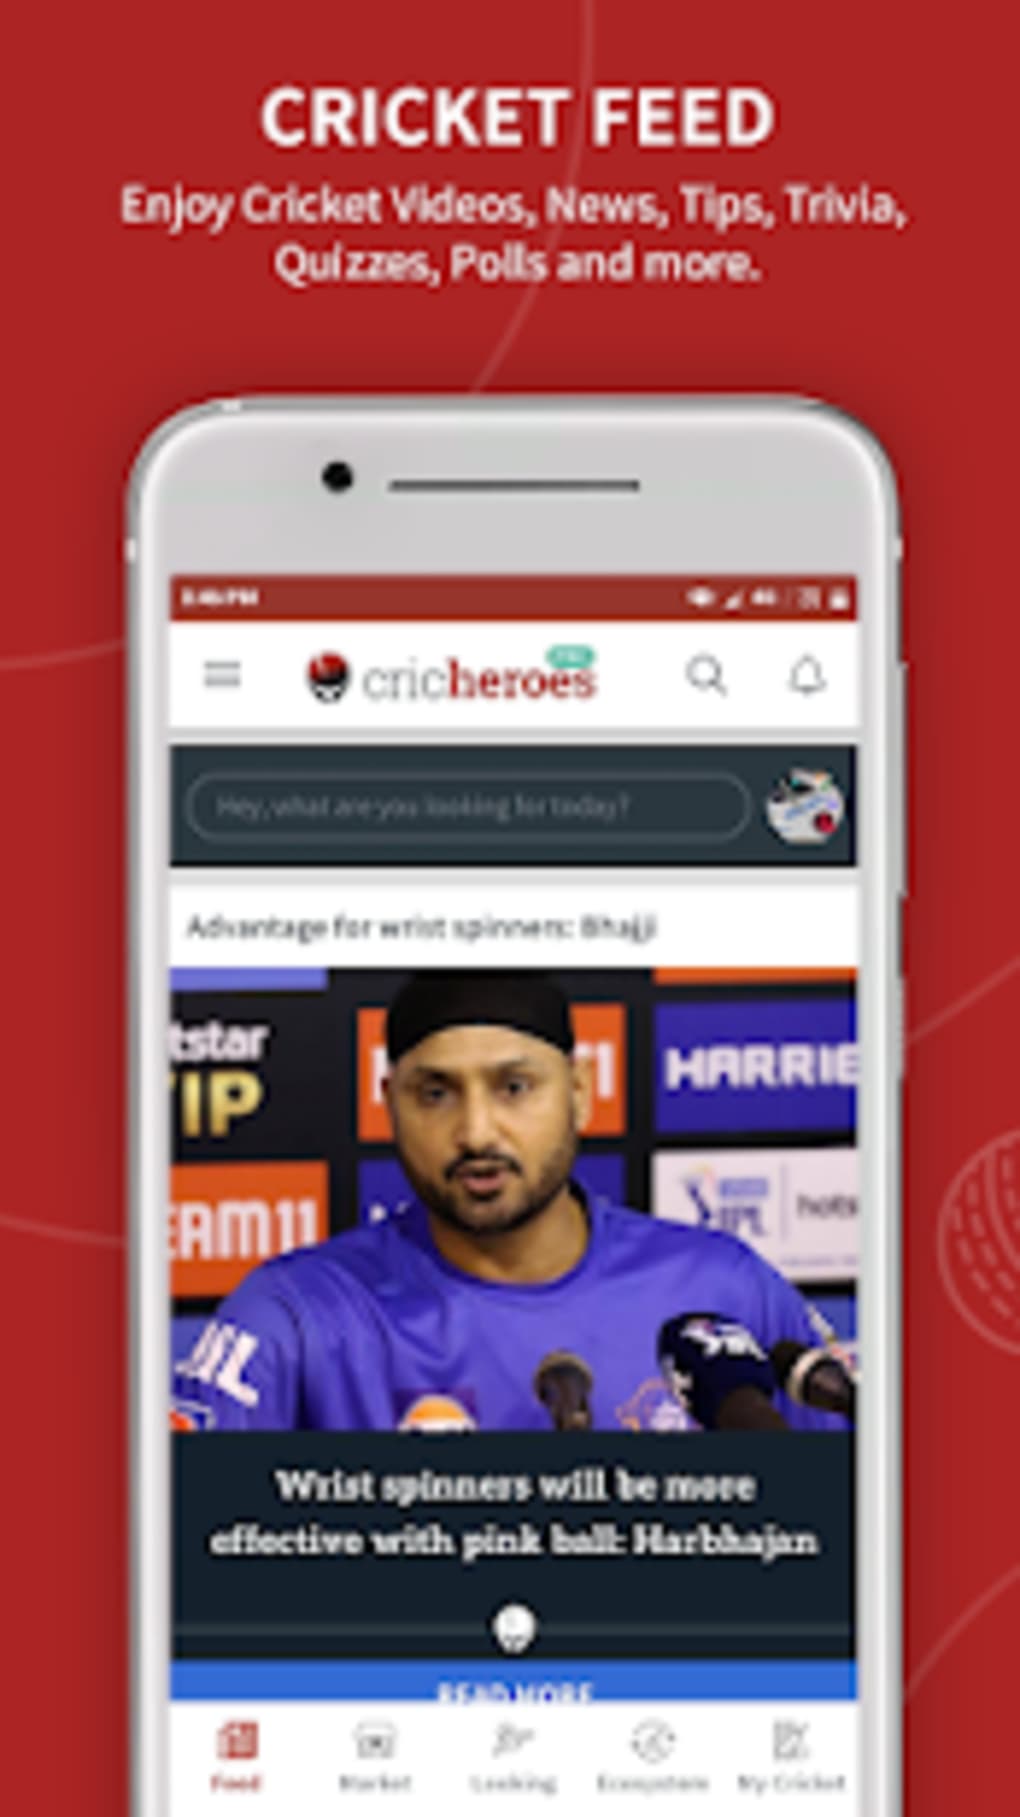 Cricket Scoring App - CricHeroes APK for Android